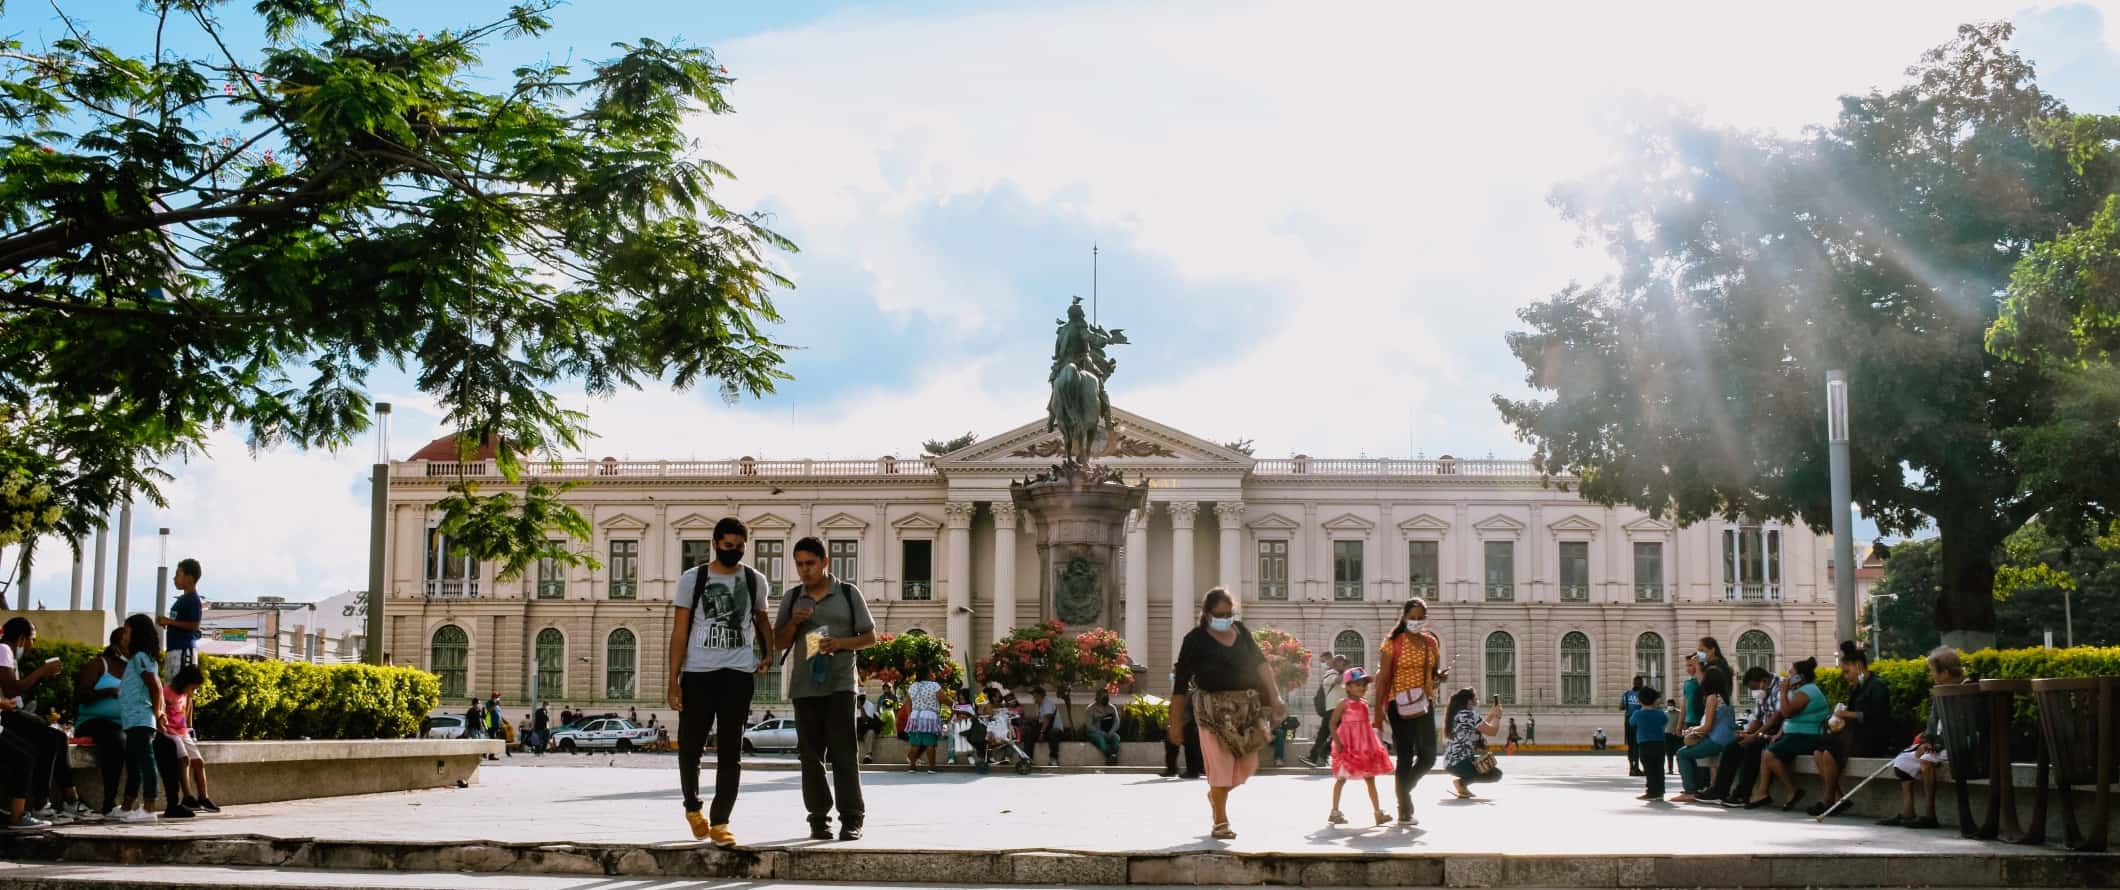 People walking around in a plaza with a historic building in the background in San Salvador, the capital of El Salvador